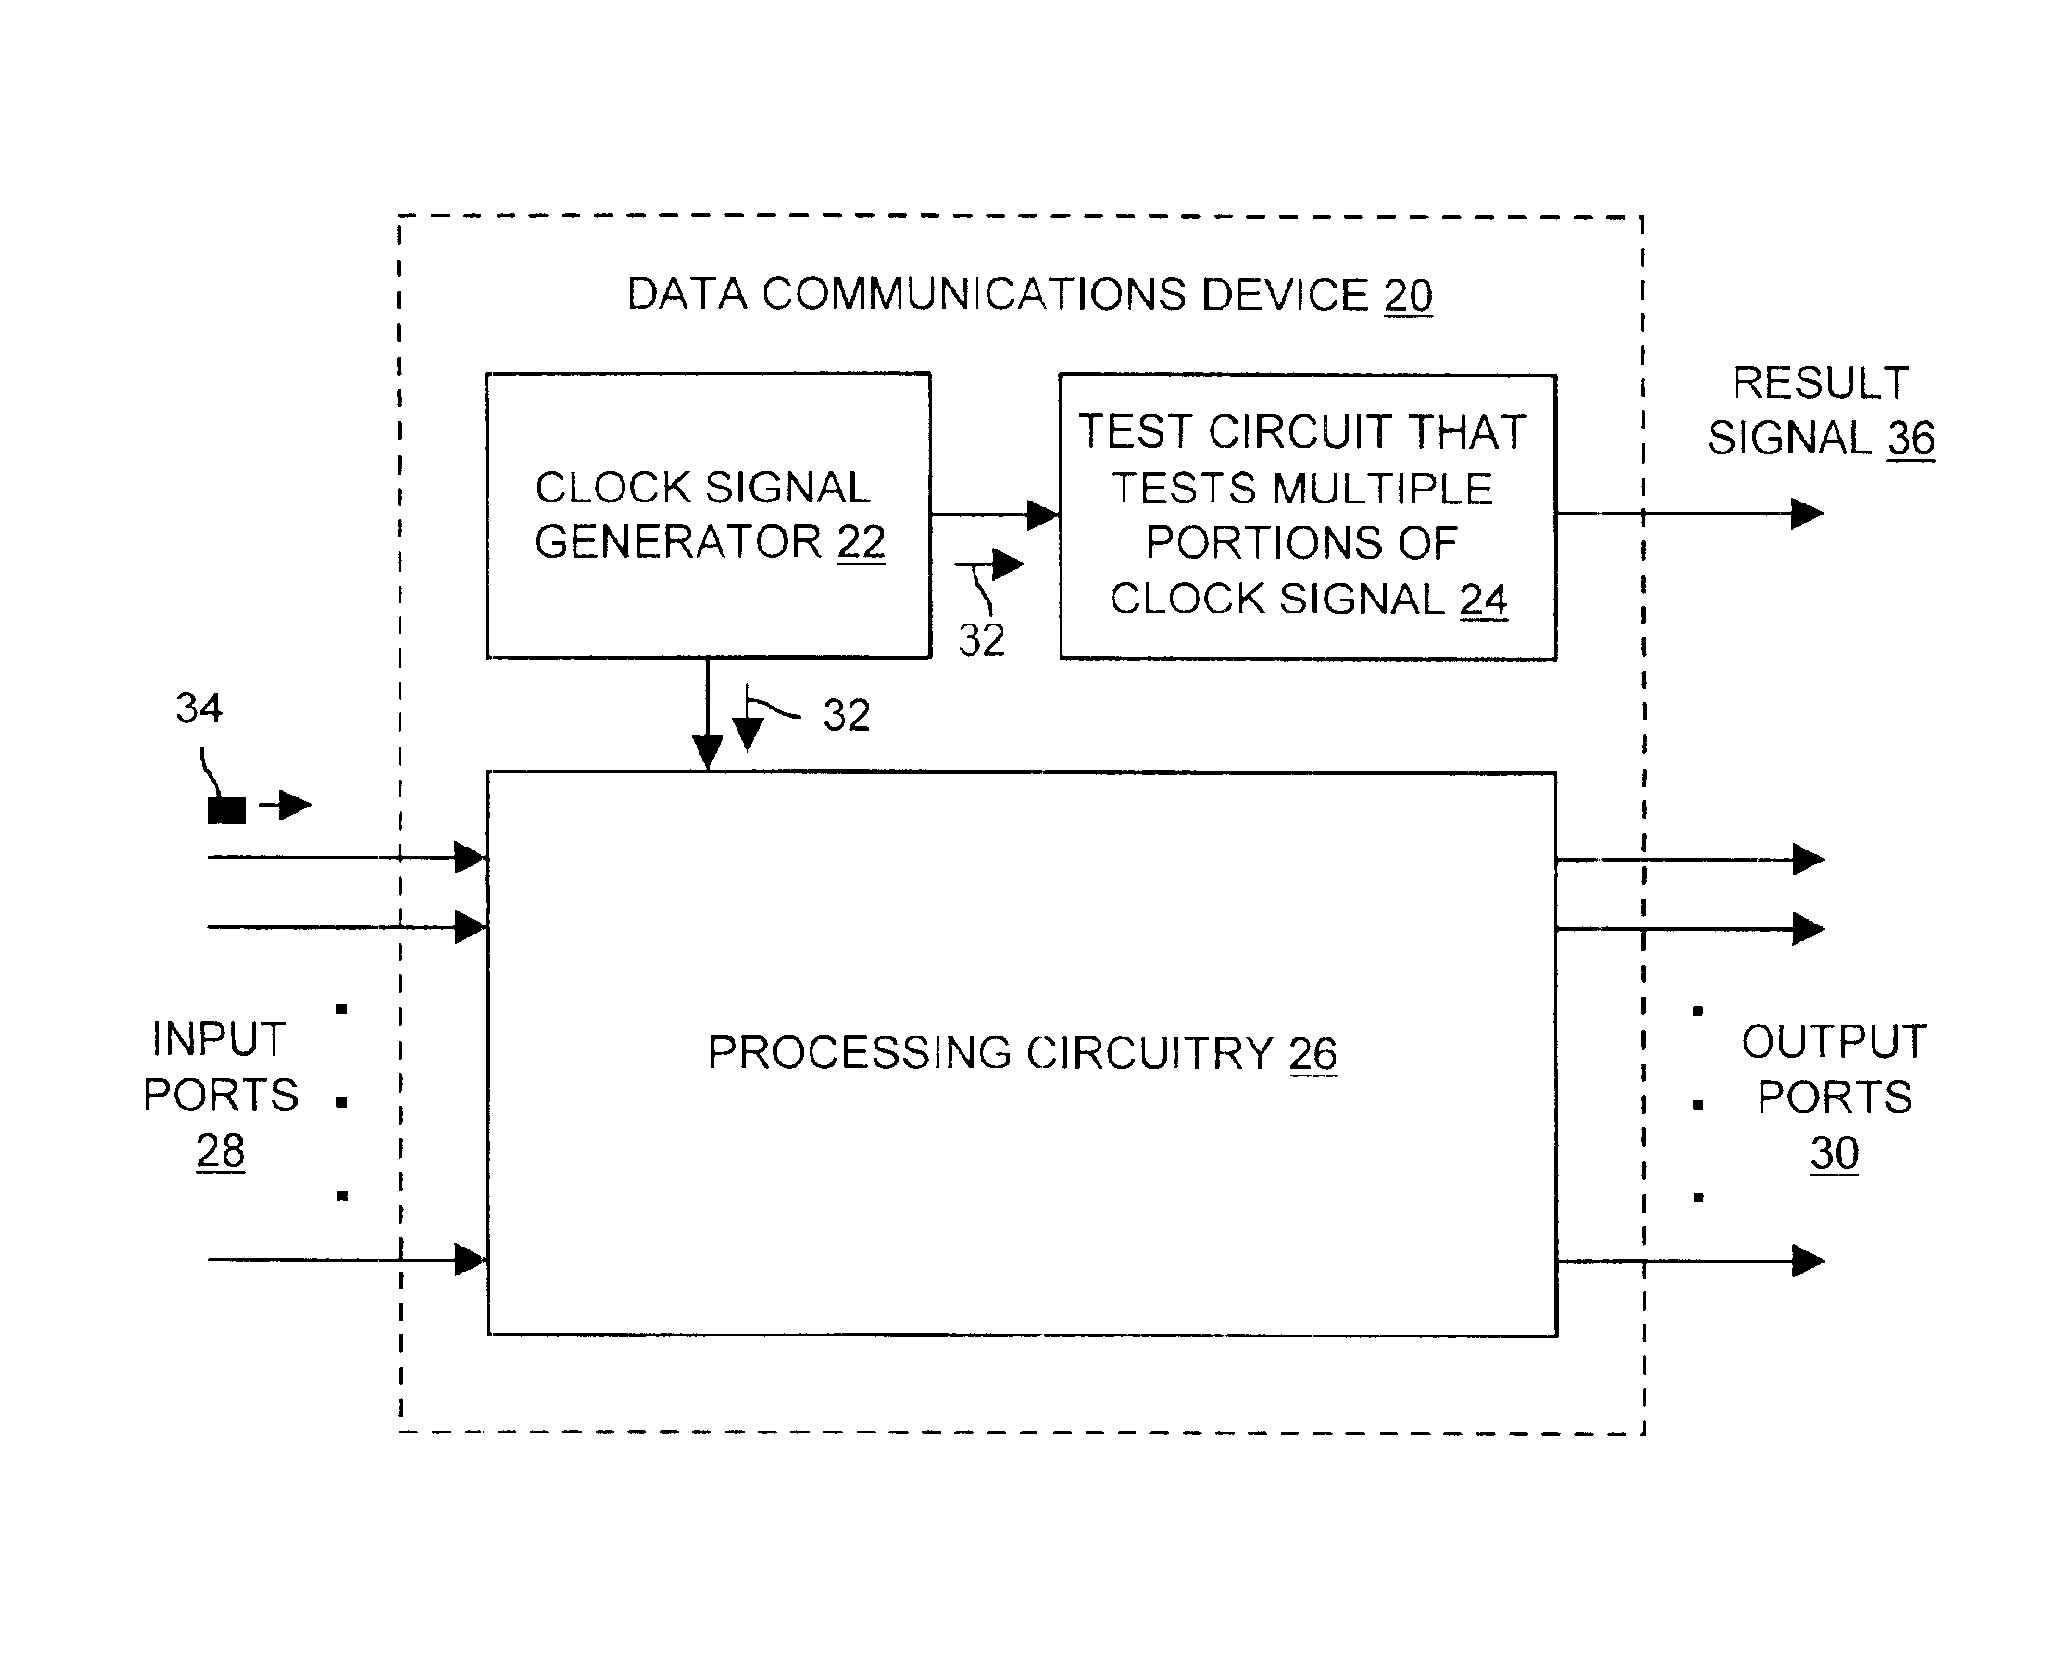 Methods and apparatus for testing a clock signal